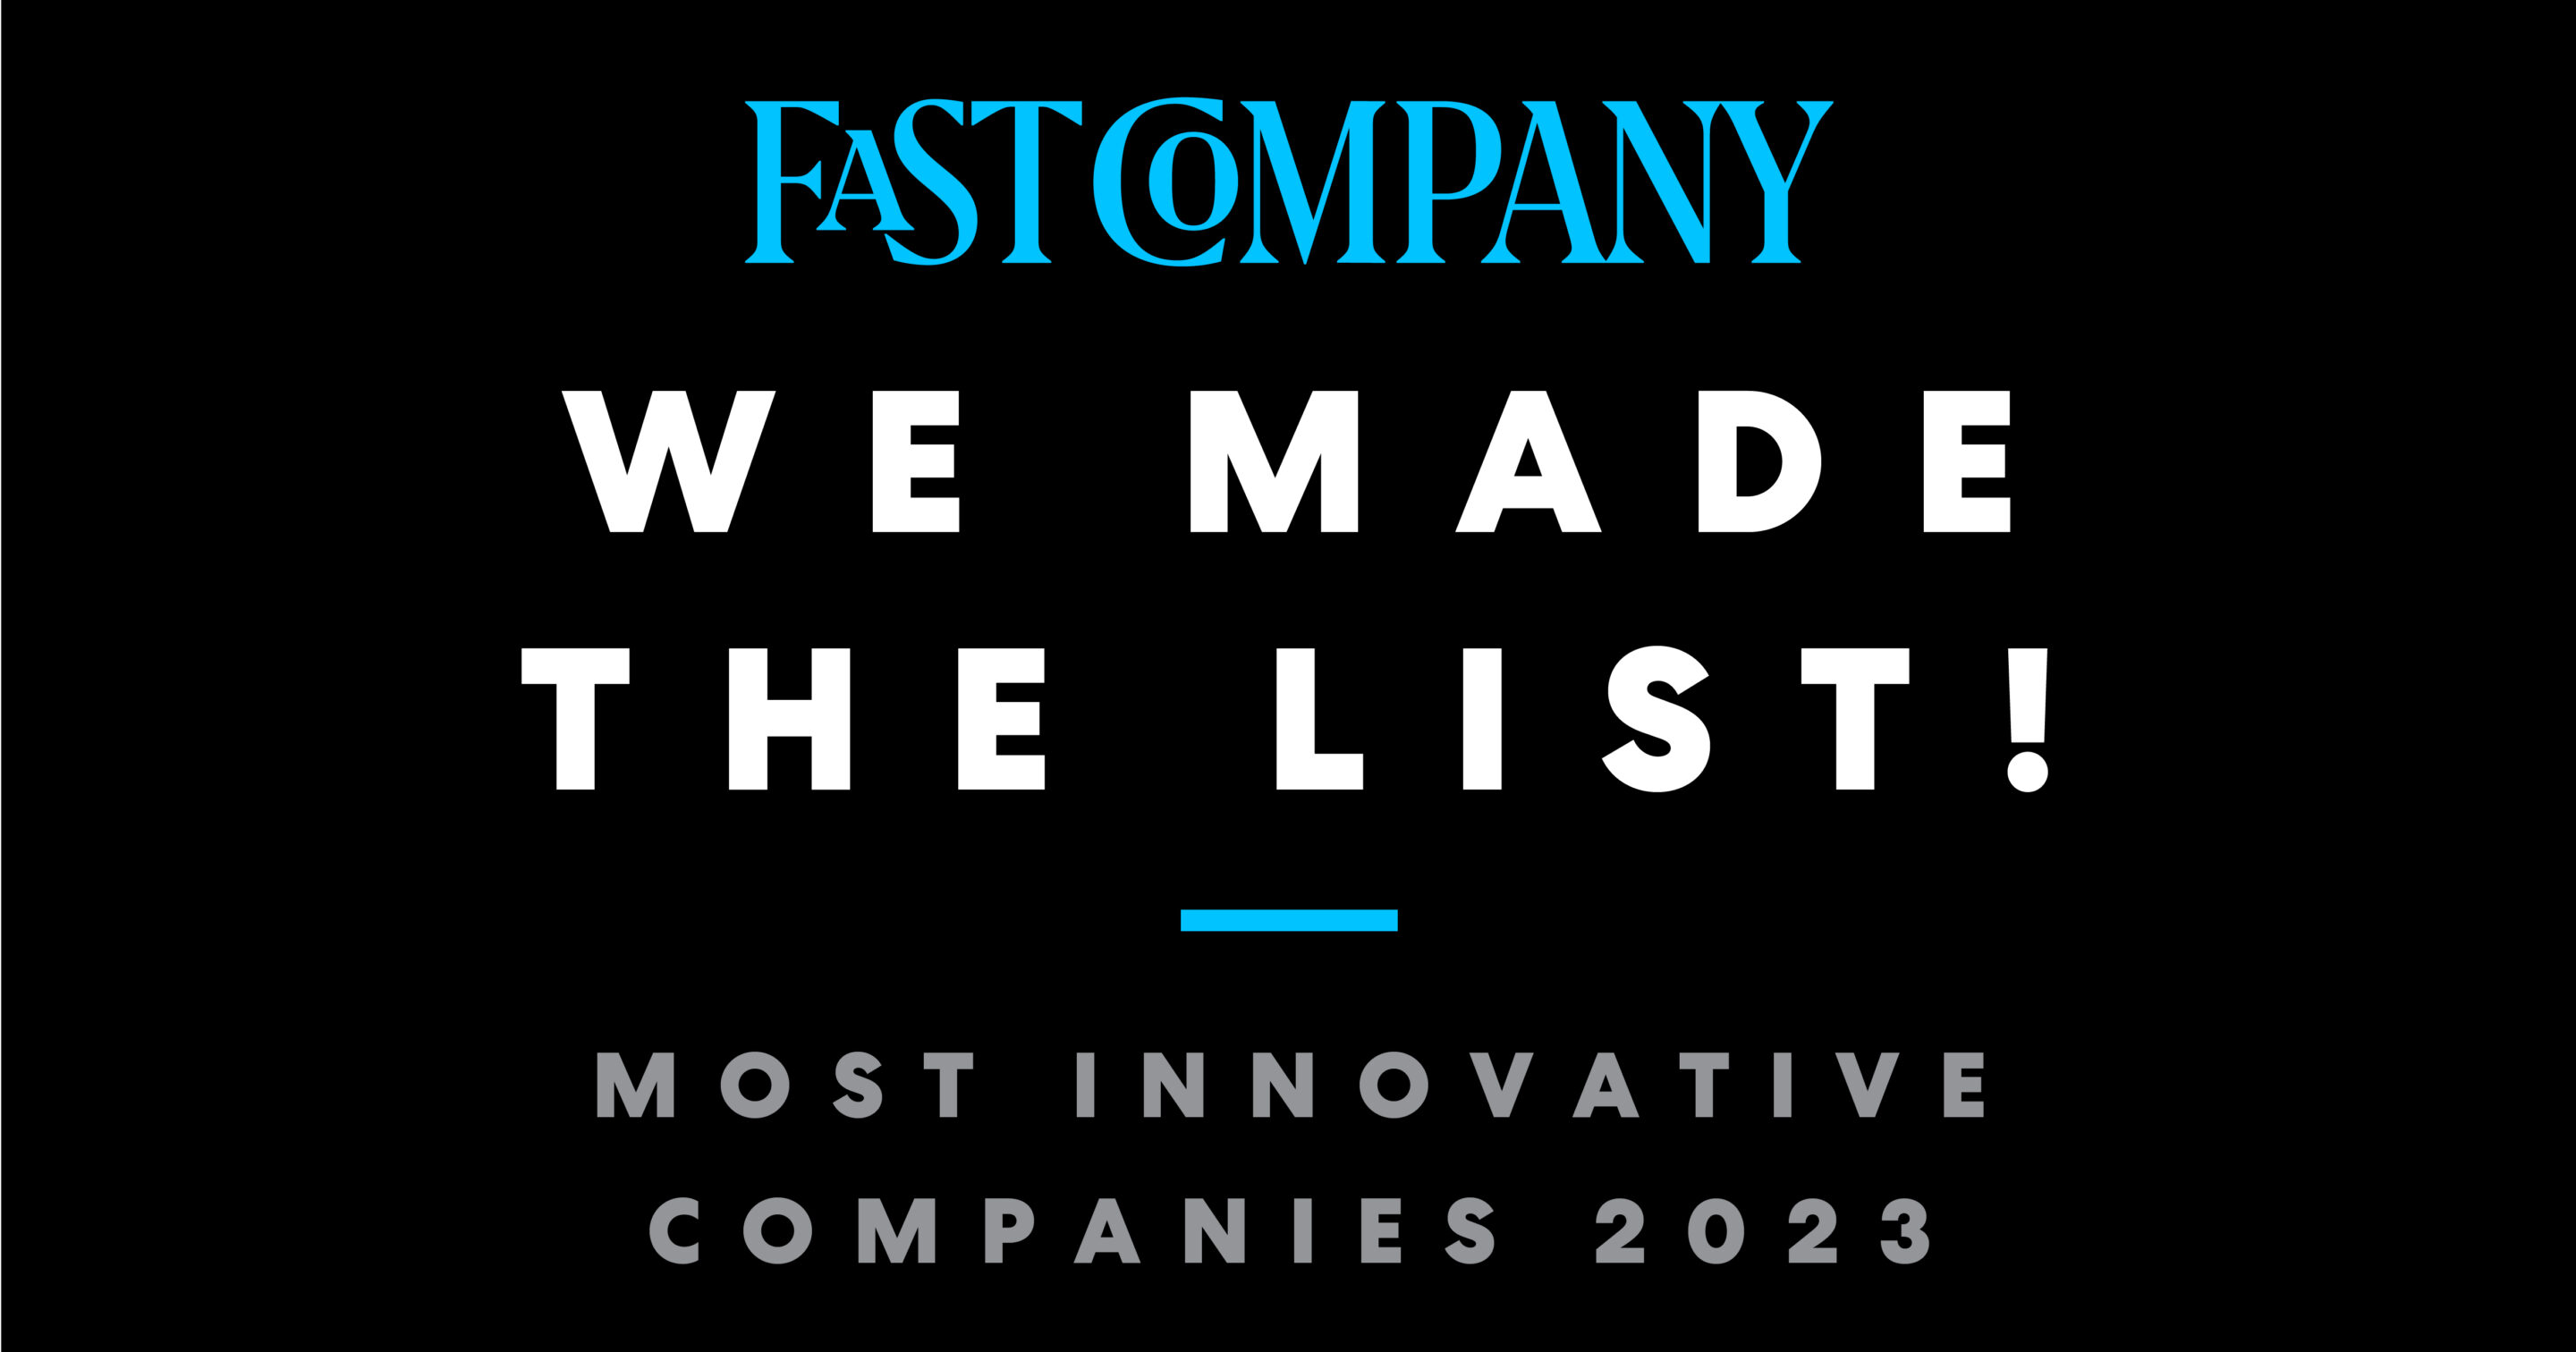 SOPHiA GENETICS Named to Fast Company’s Annual List of the World’s Most Innovative Companies for 2023